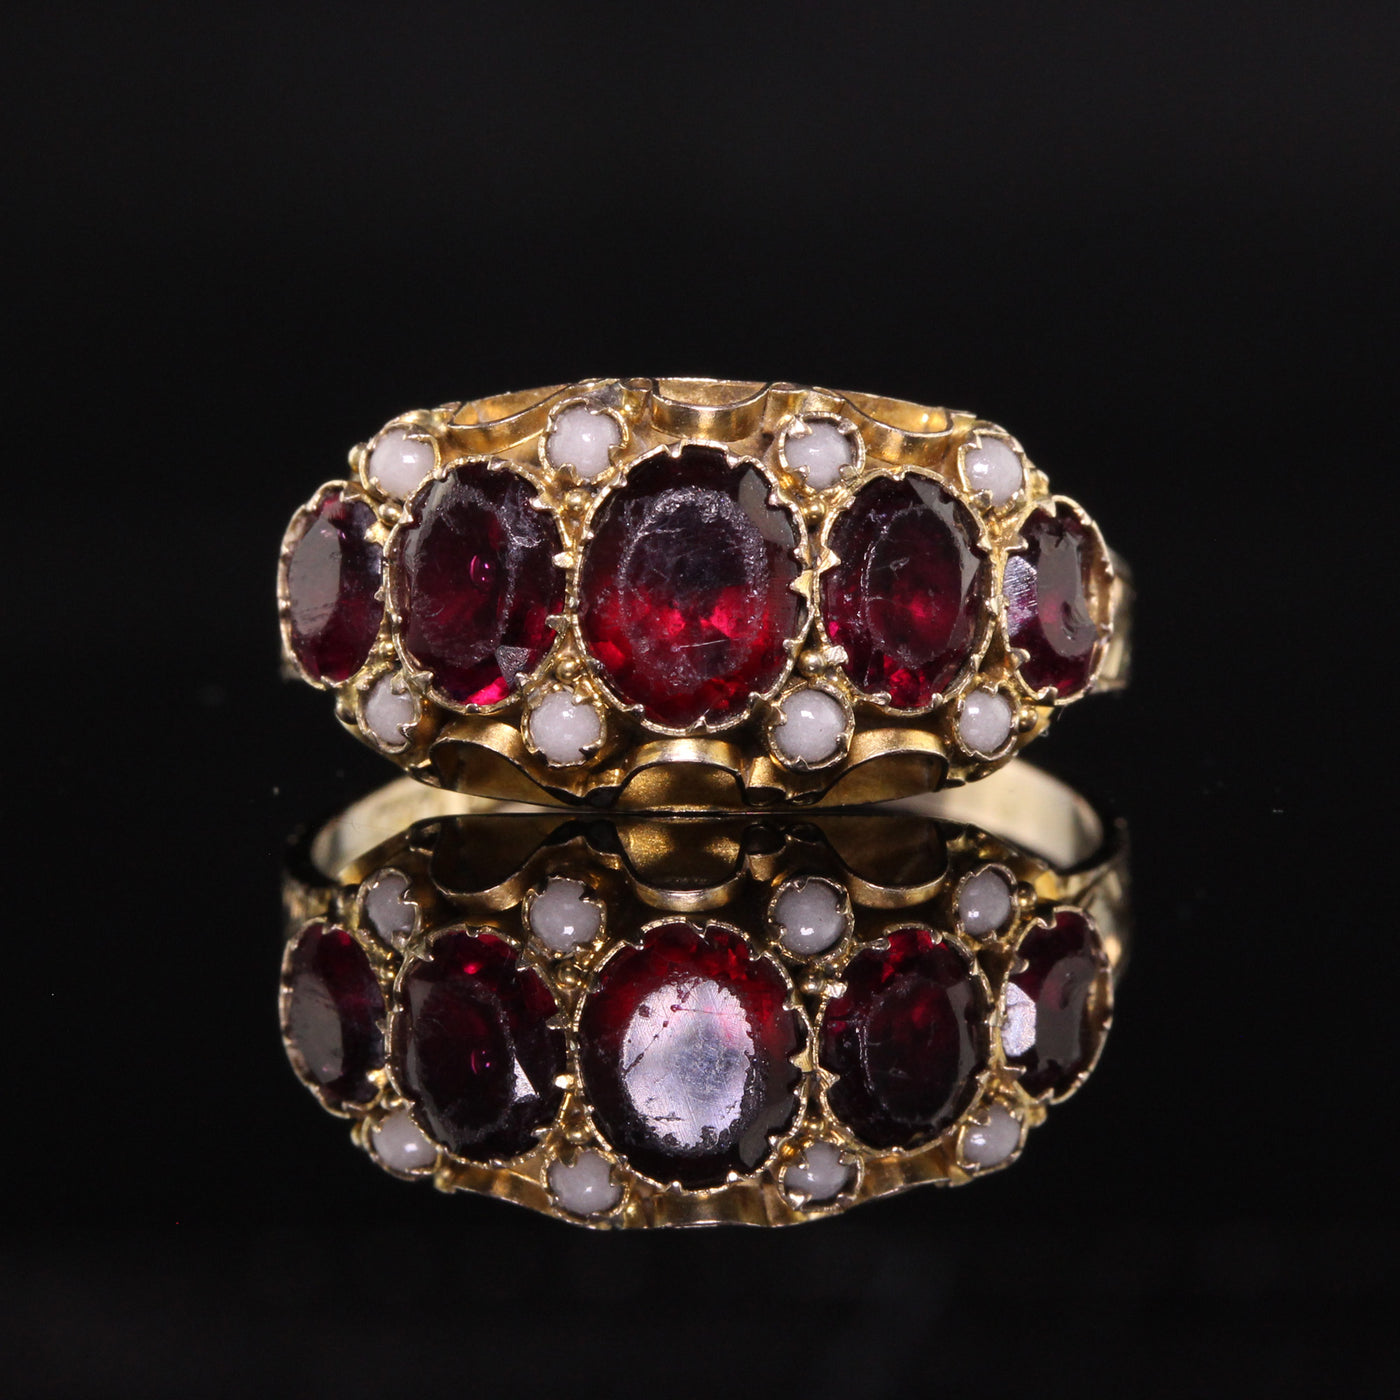 Antique Victorian 9K Yellow Gold Garnet and Seed Pearl Five Stone Ring